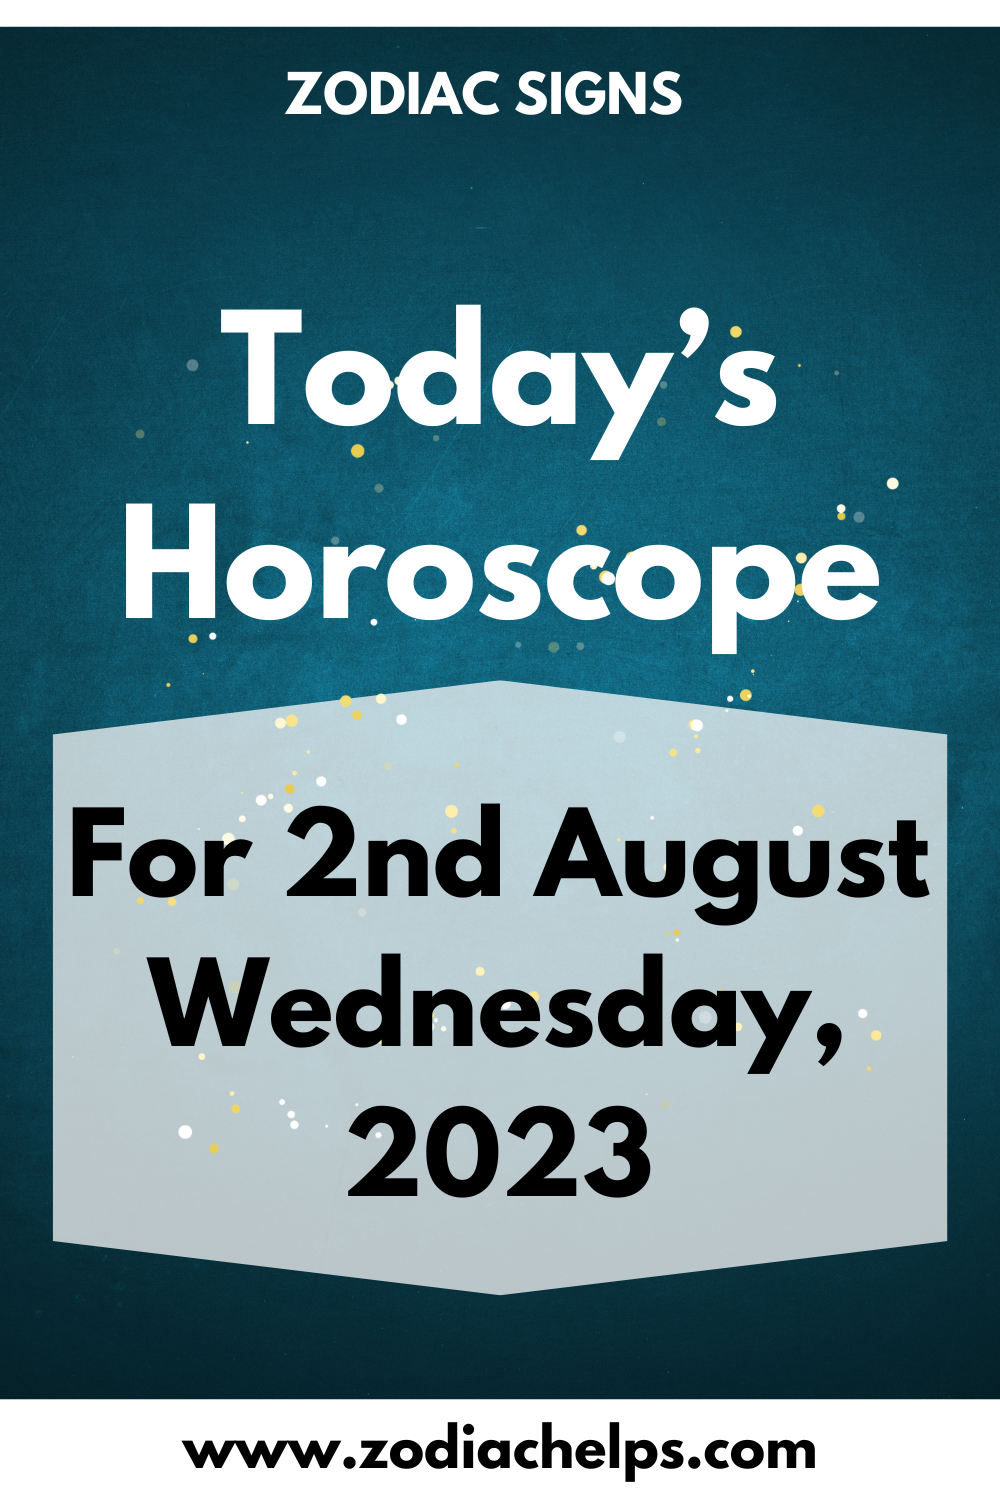 Today’s Horoscope for 2nd August Wednesday, 2023